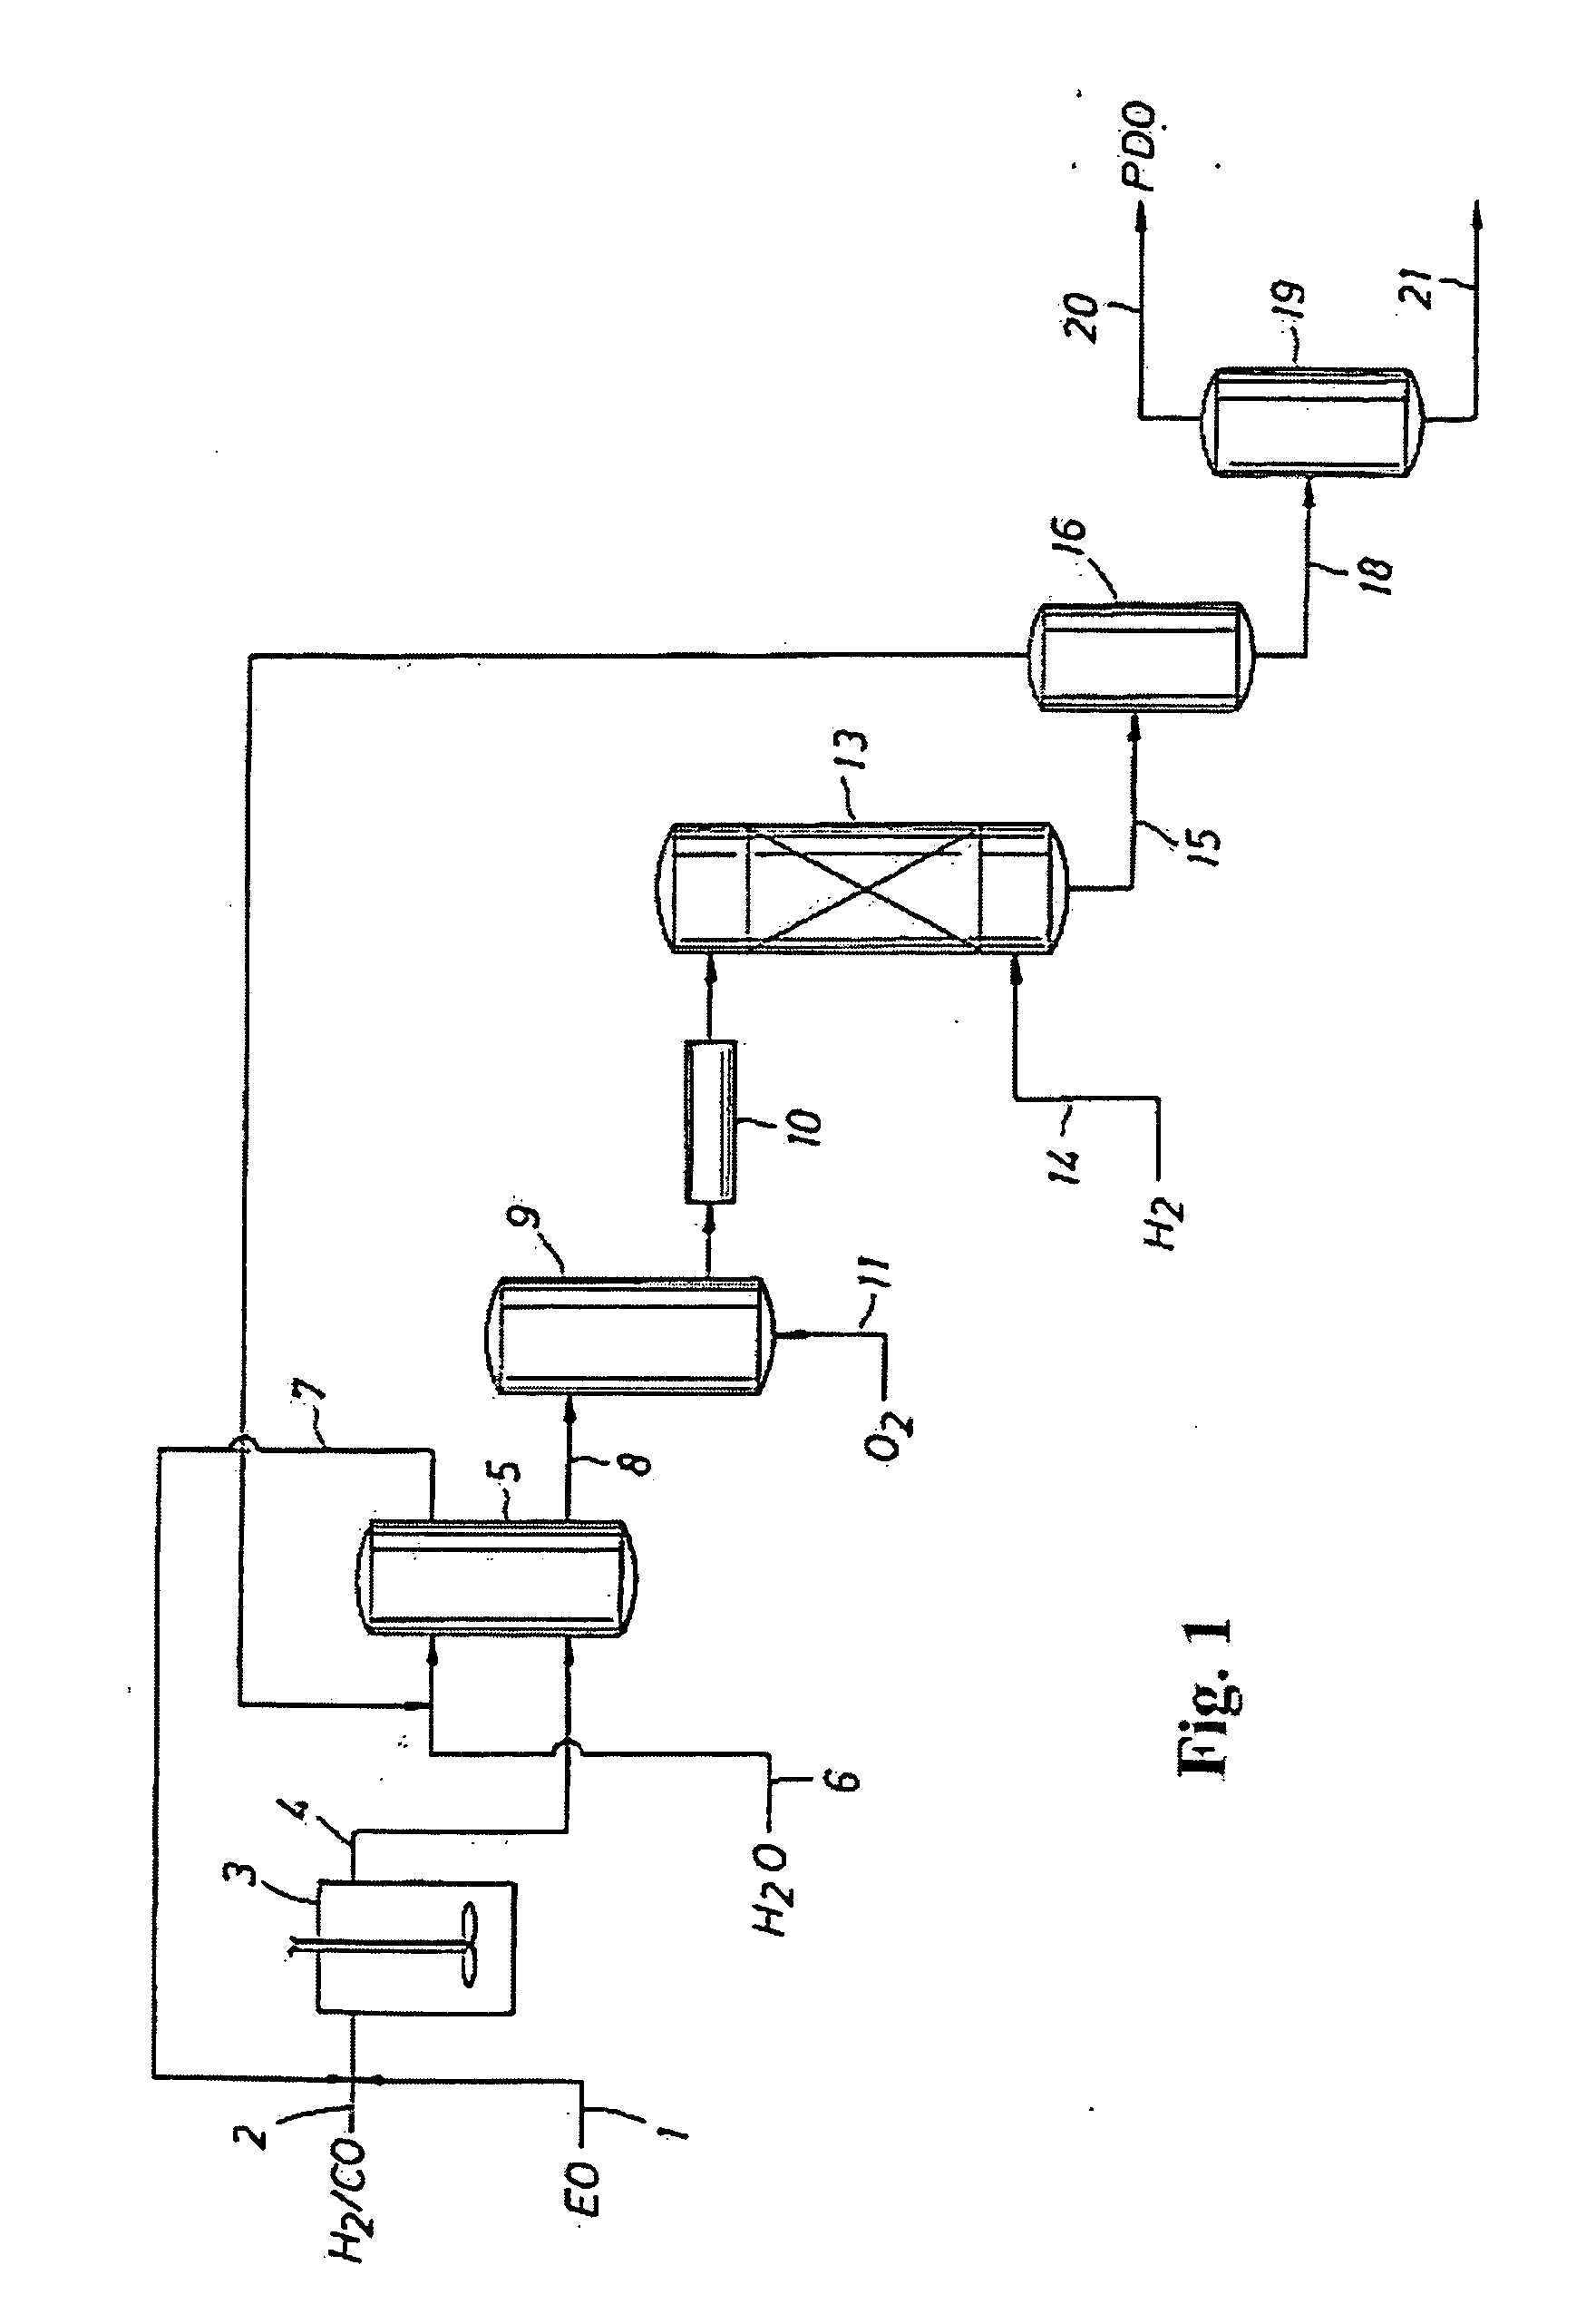 Treatment of an aqueous mixture containing an alkylene oxide with an ion exchange resin